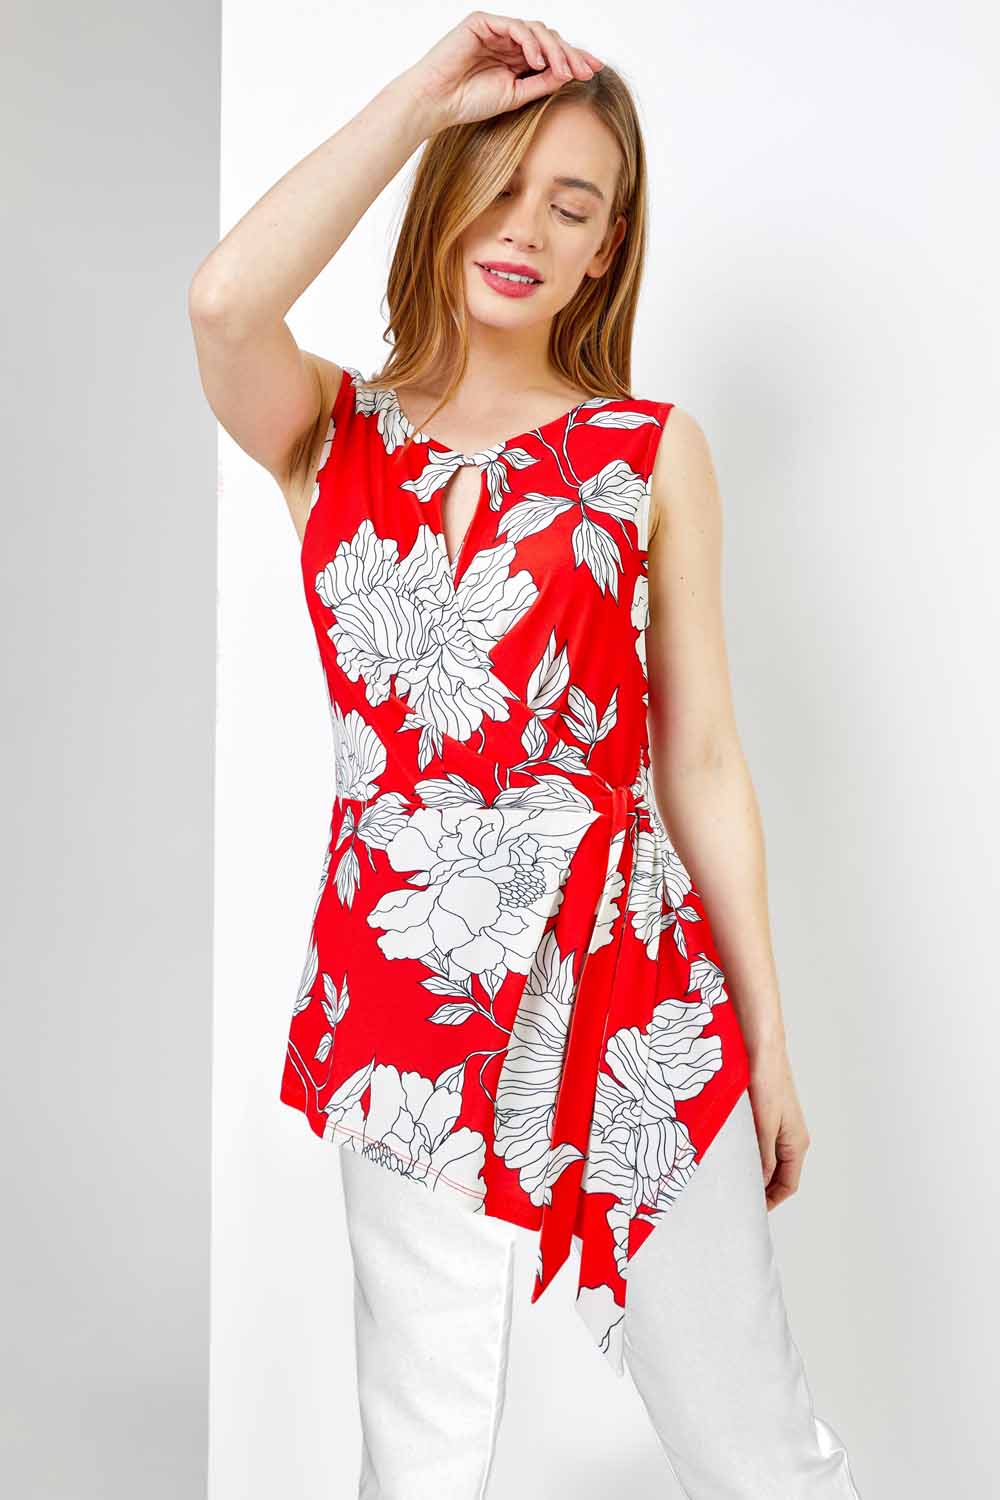 Red Petite Floral Print Asymmetric Top, Image 1 of 4